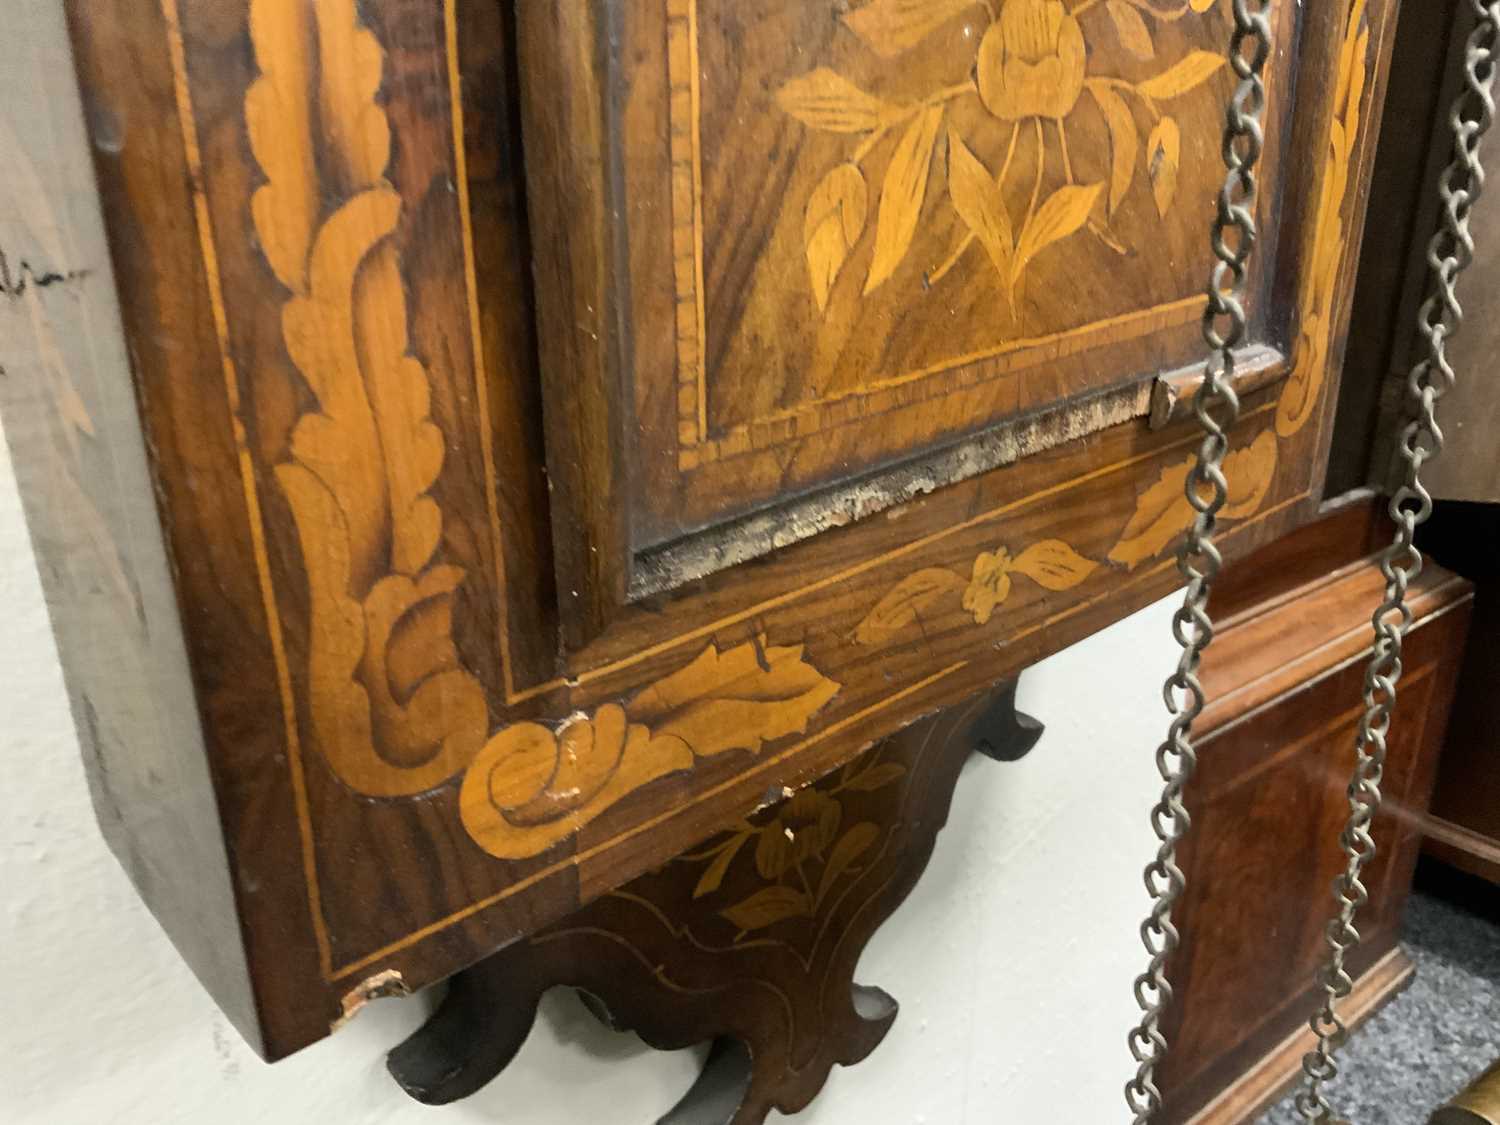 A MID 18TH CENTURY WALNUT AND DUTCH MARQUETRY HOODED 30HR WALL CLOCK - Image 16 of 18